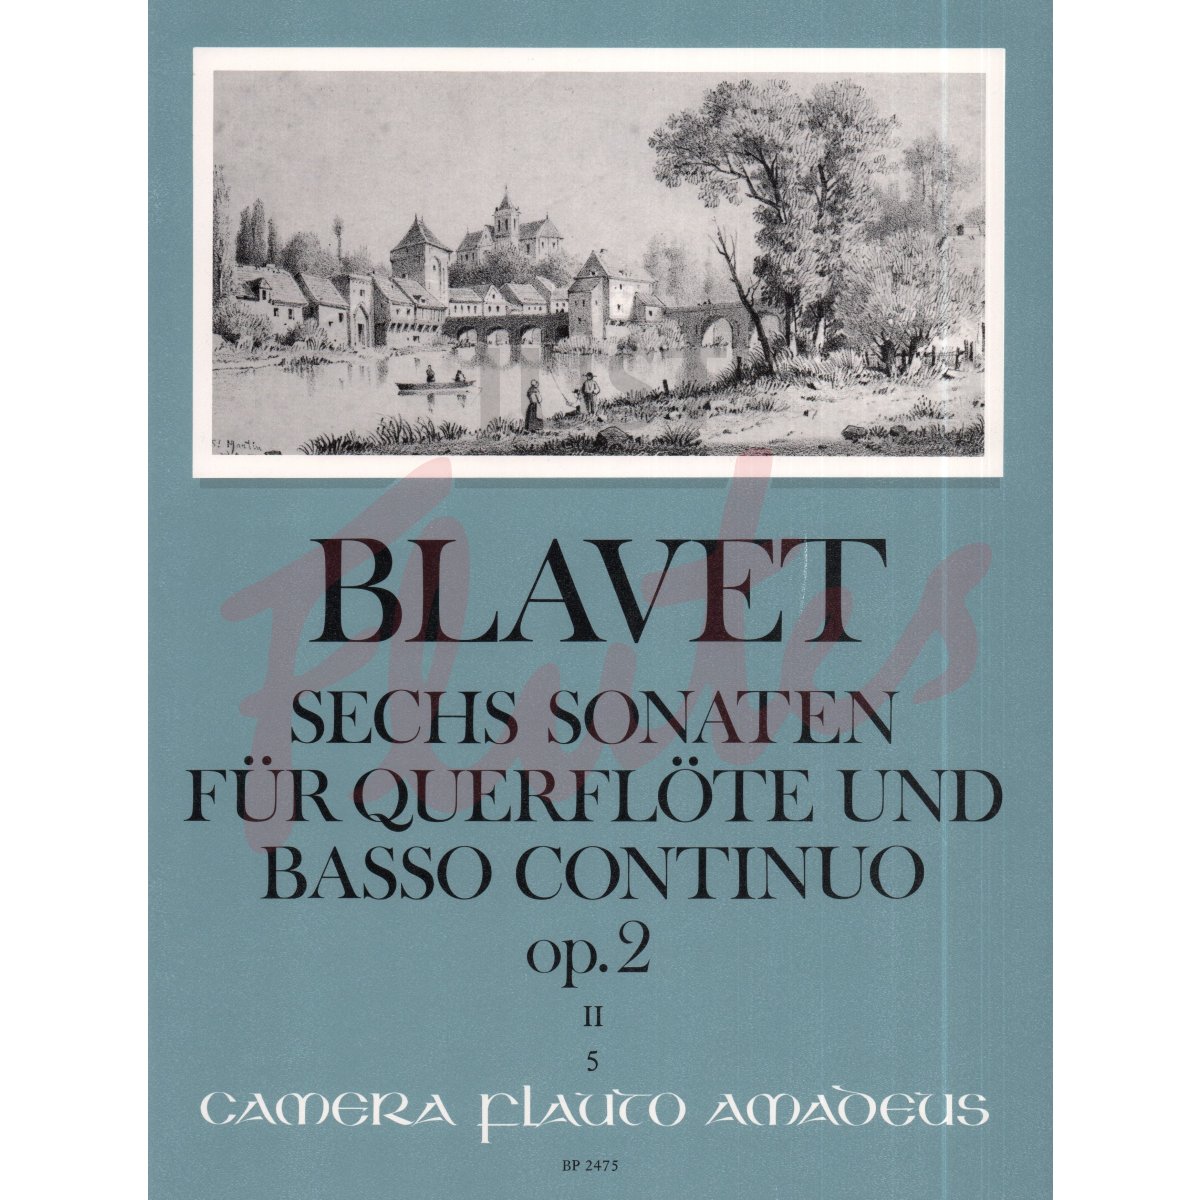 Sonatas for Flute and Basso Continuo